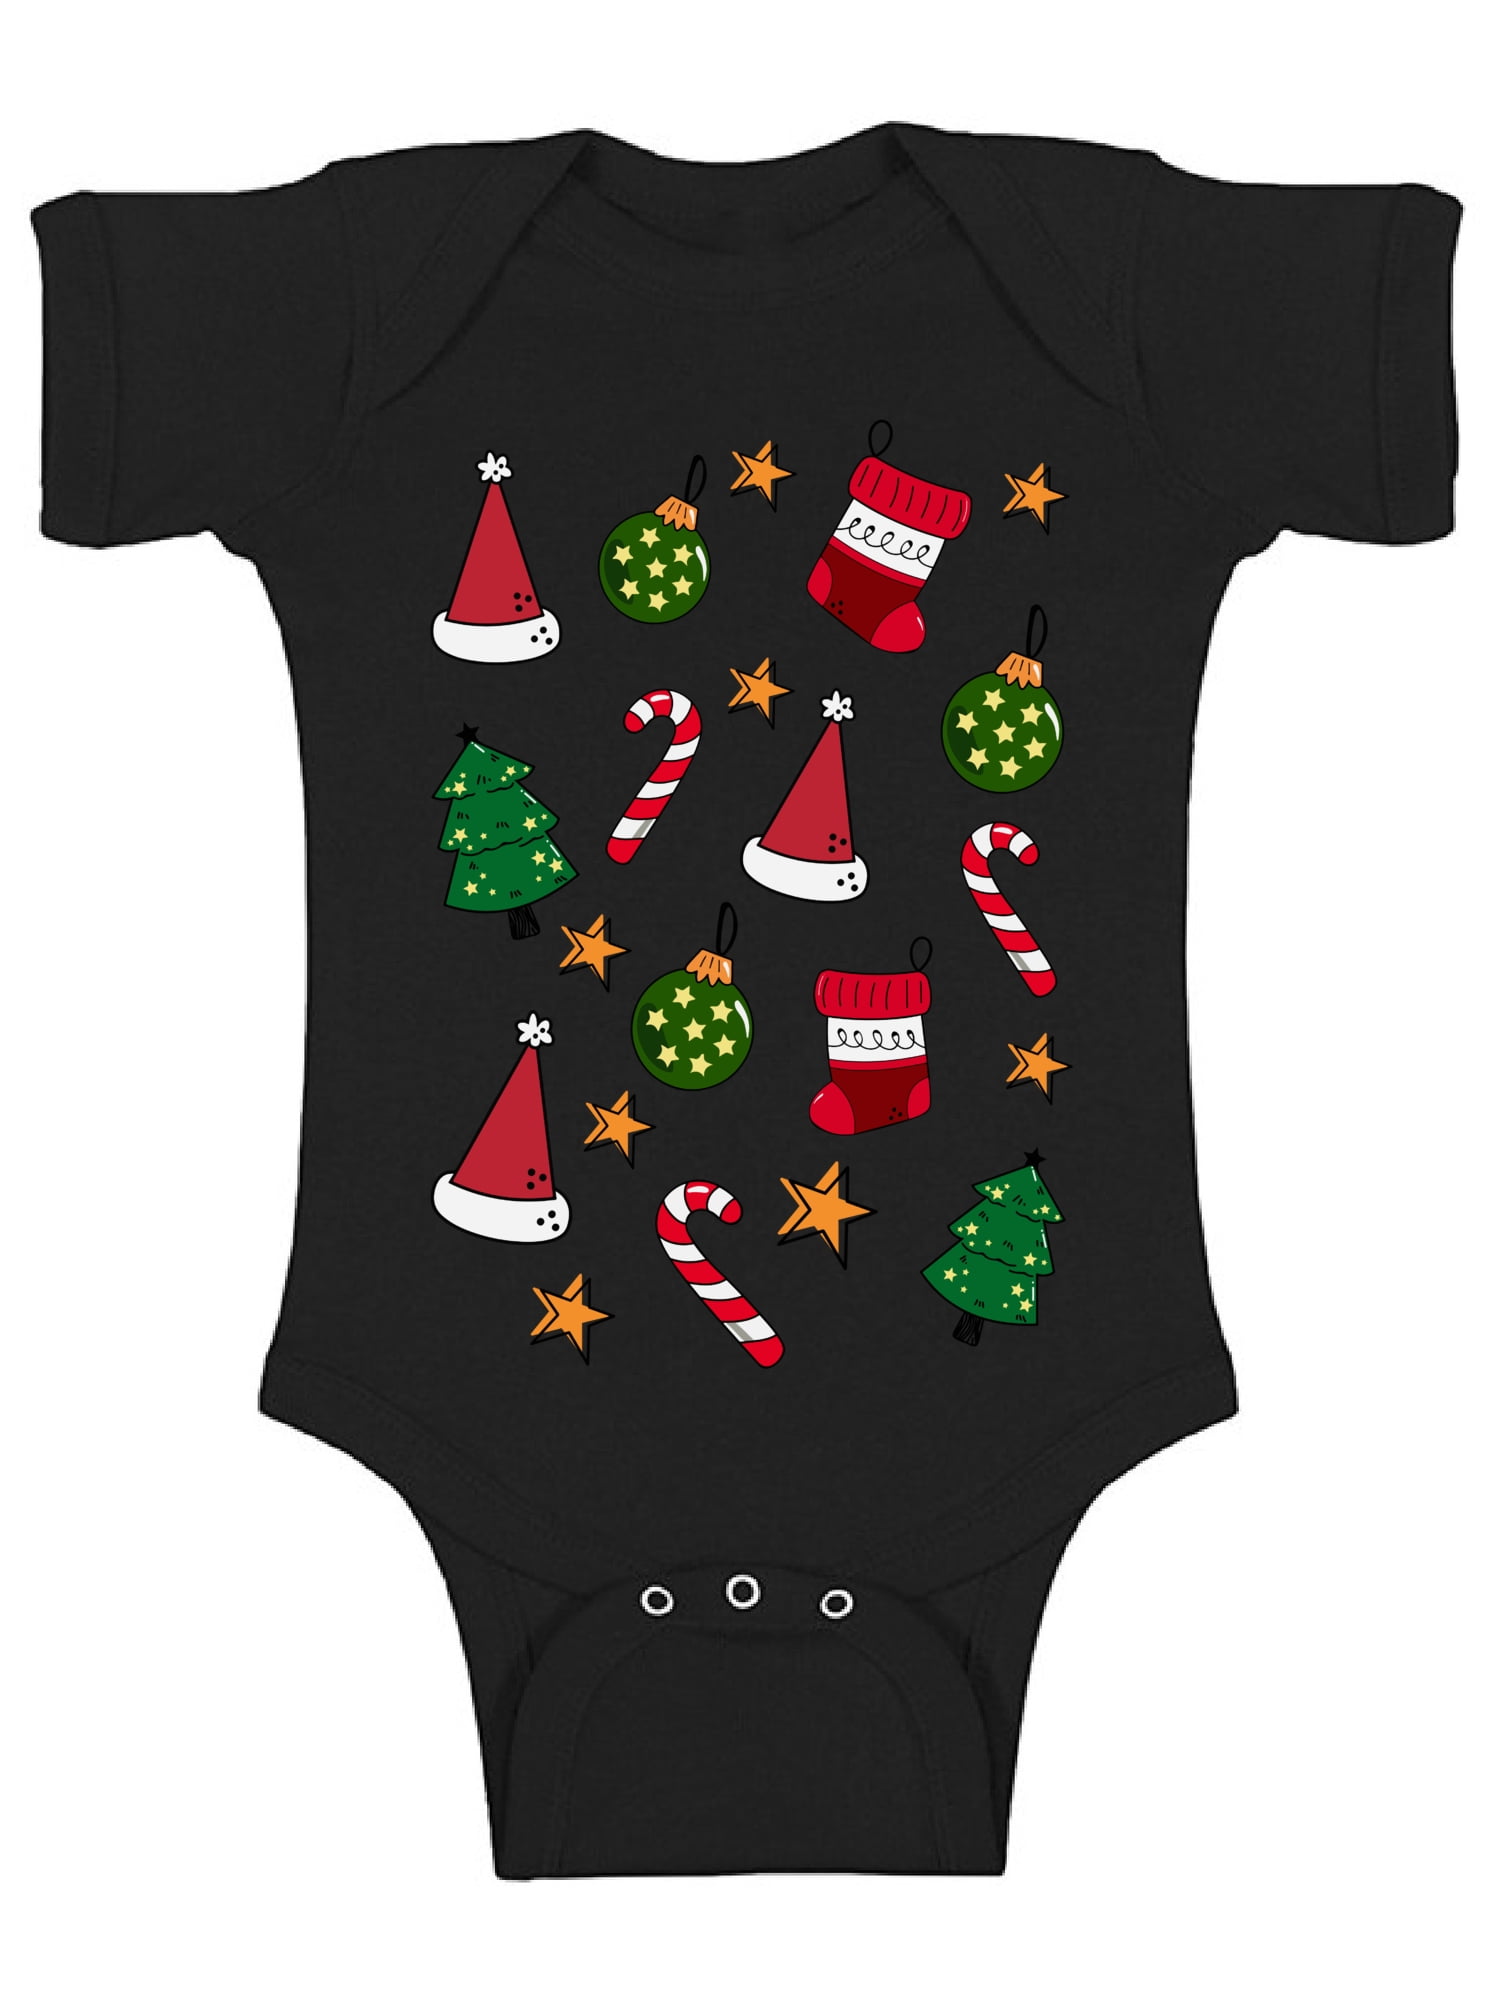 Awkward Styles Ugly Christmas Baby Outfit Bodysuit Xmas Pattern Romper ...